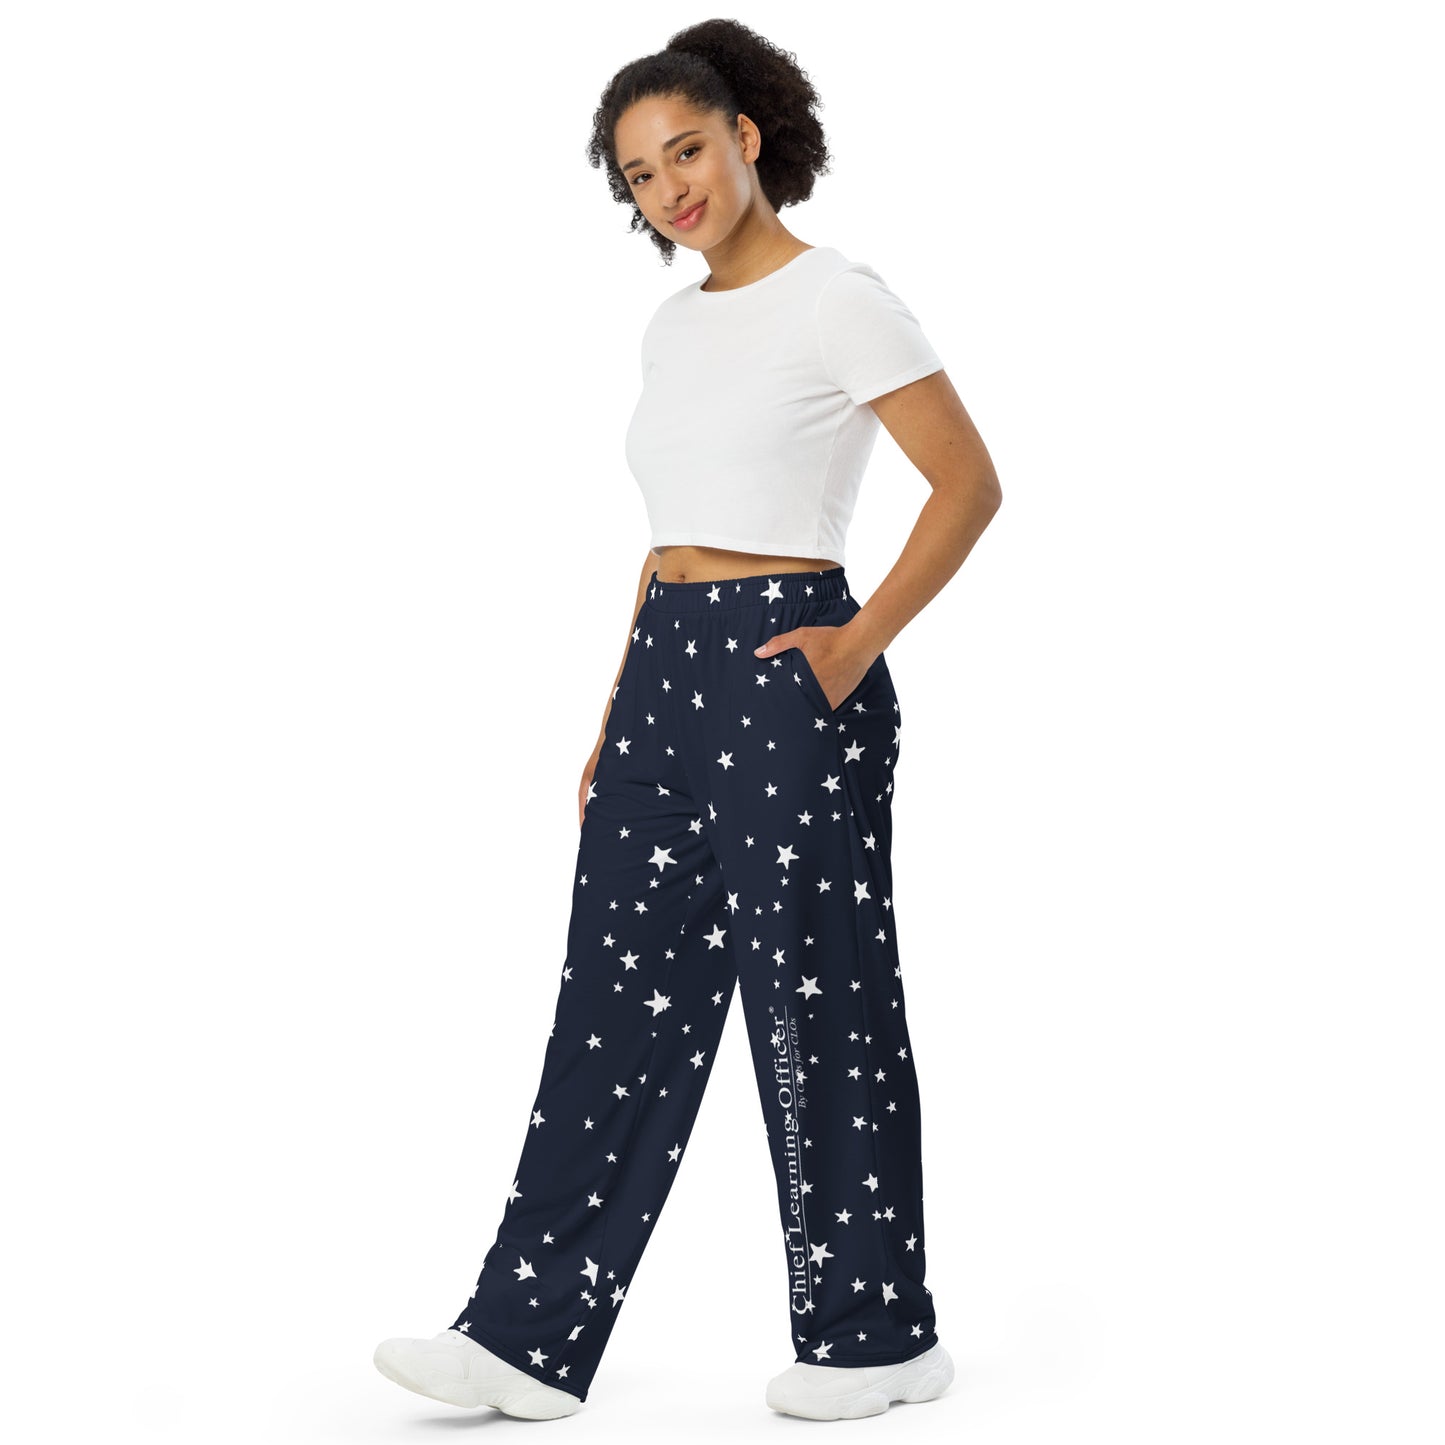 Chief Learning Officer Starry Night Unisex Pajama Pants